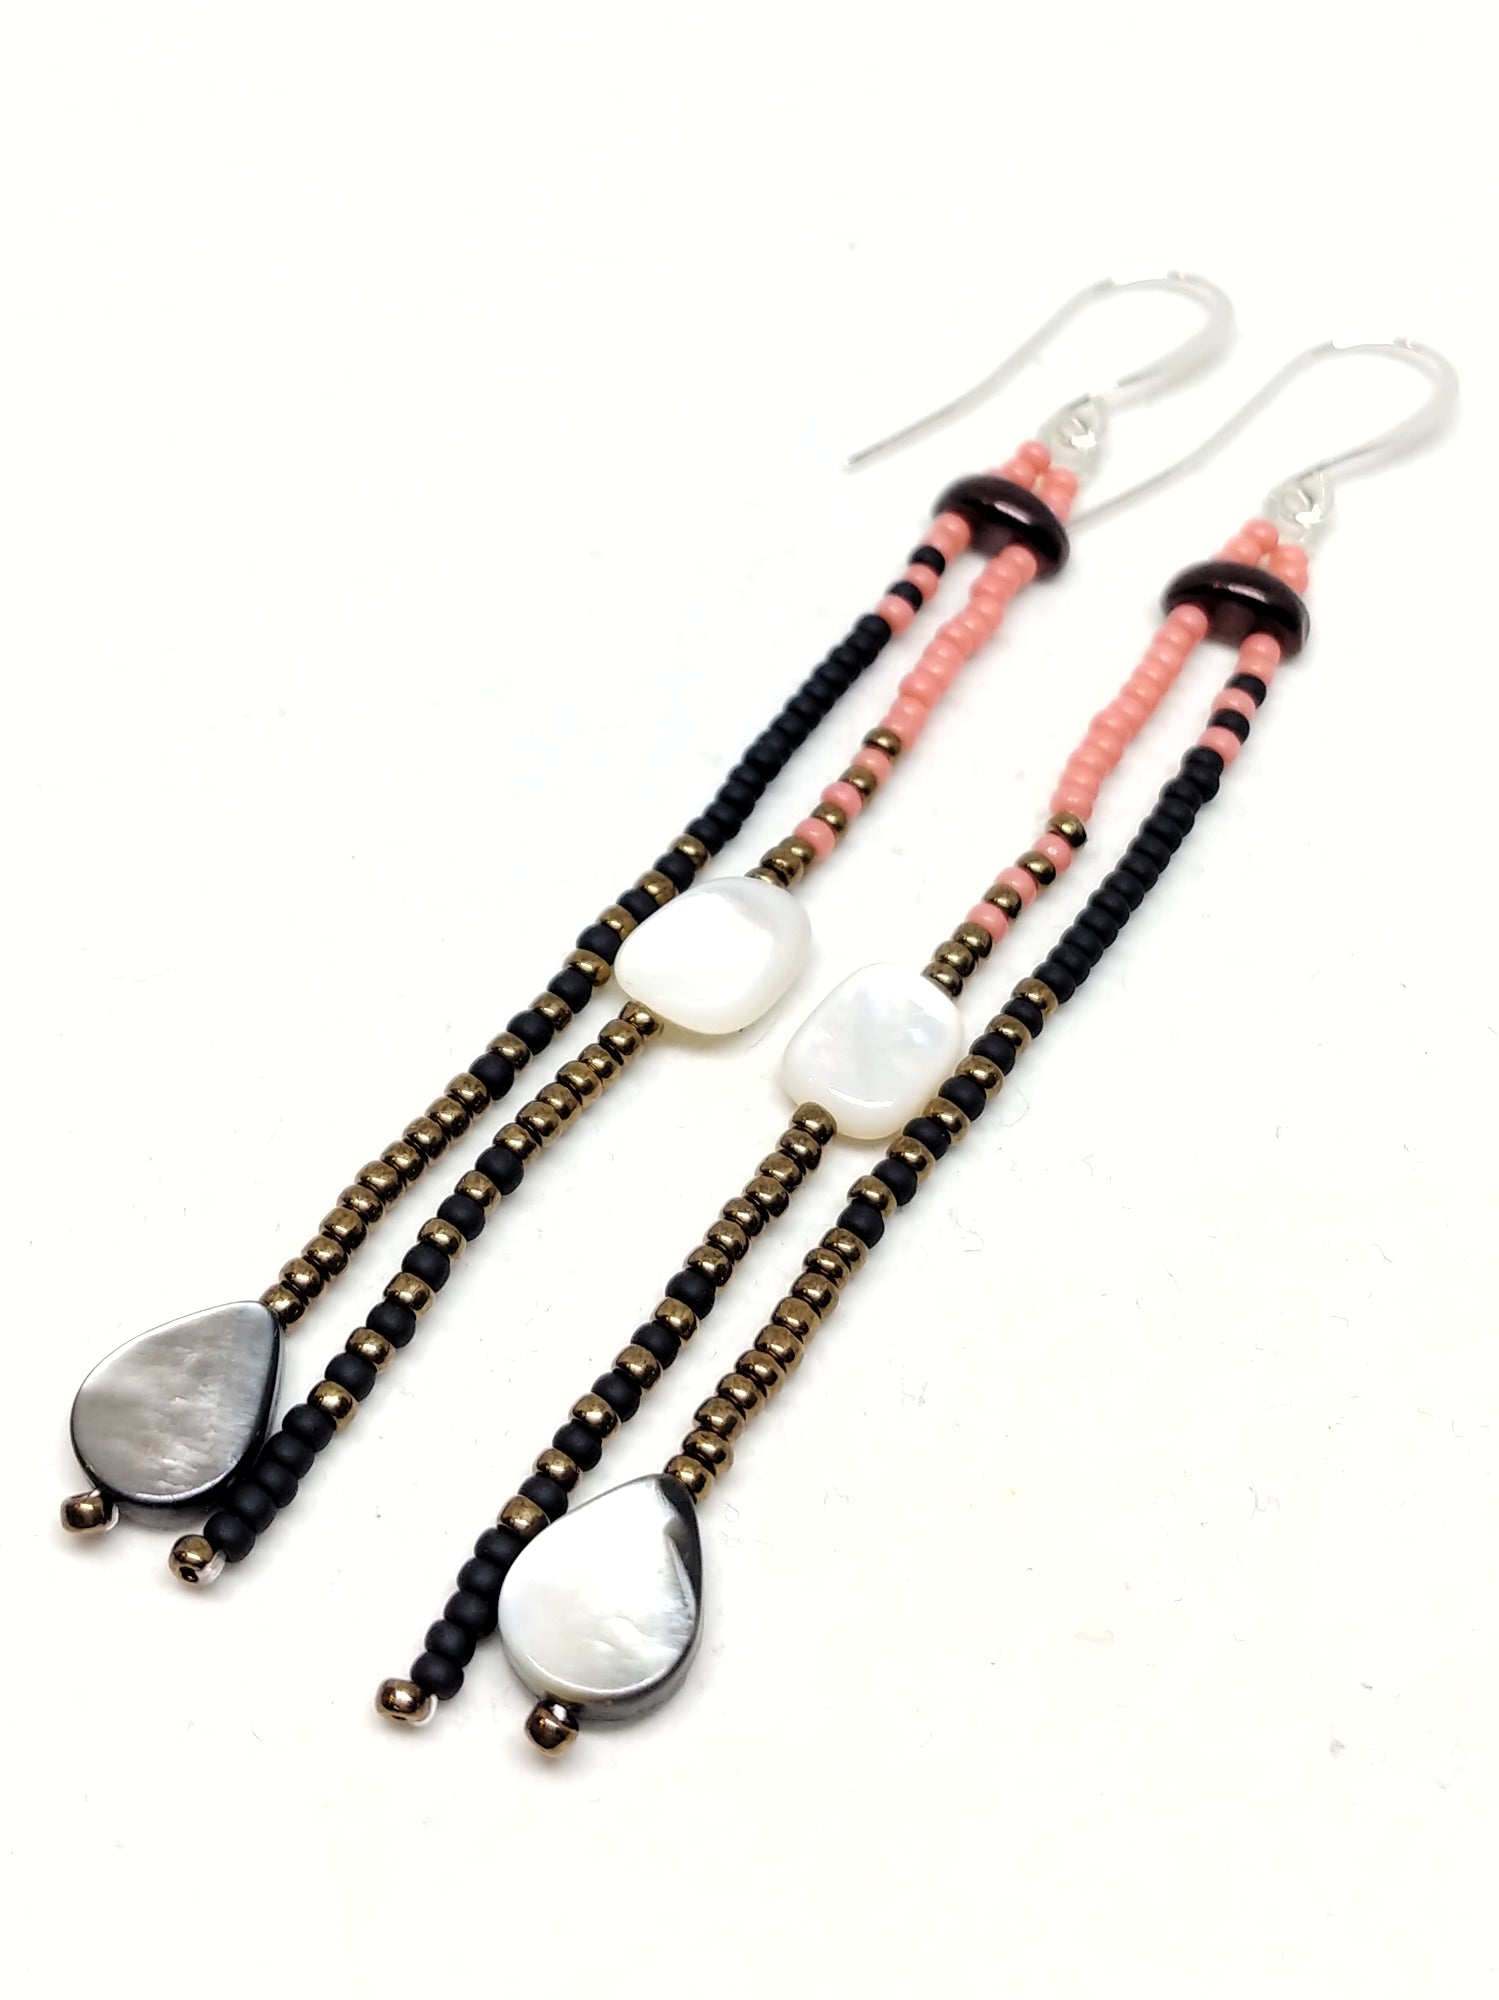 Ready To Rise Dangles: Silver wires featuring white and black lip mother of pearl, and seed beads in salmon, black and bronze.